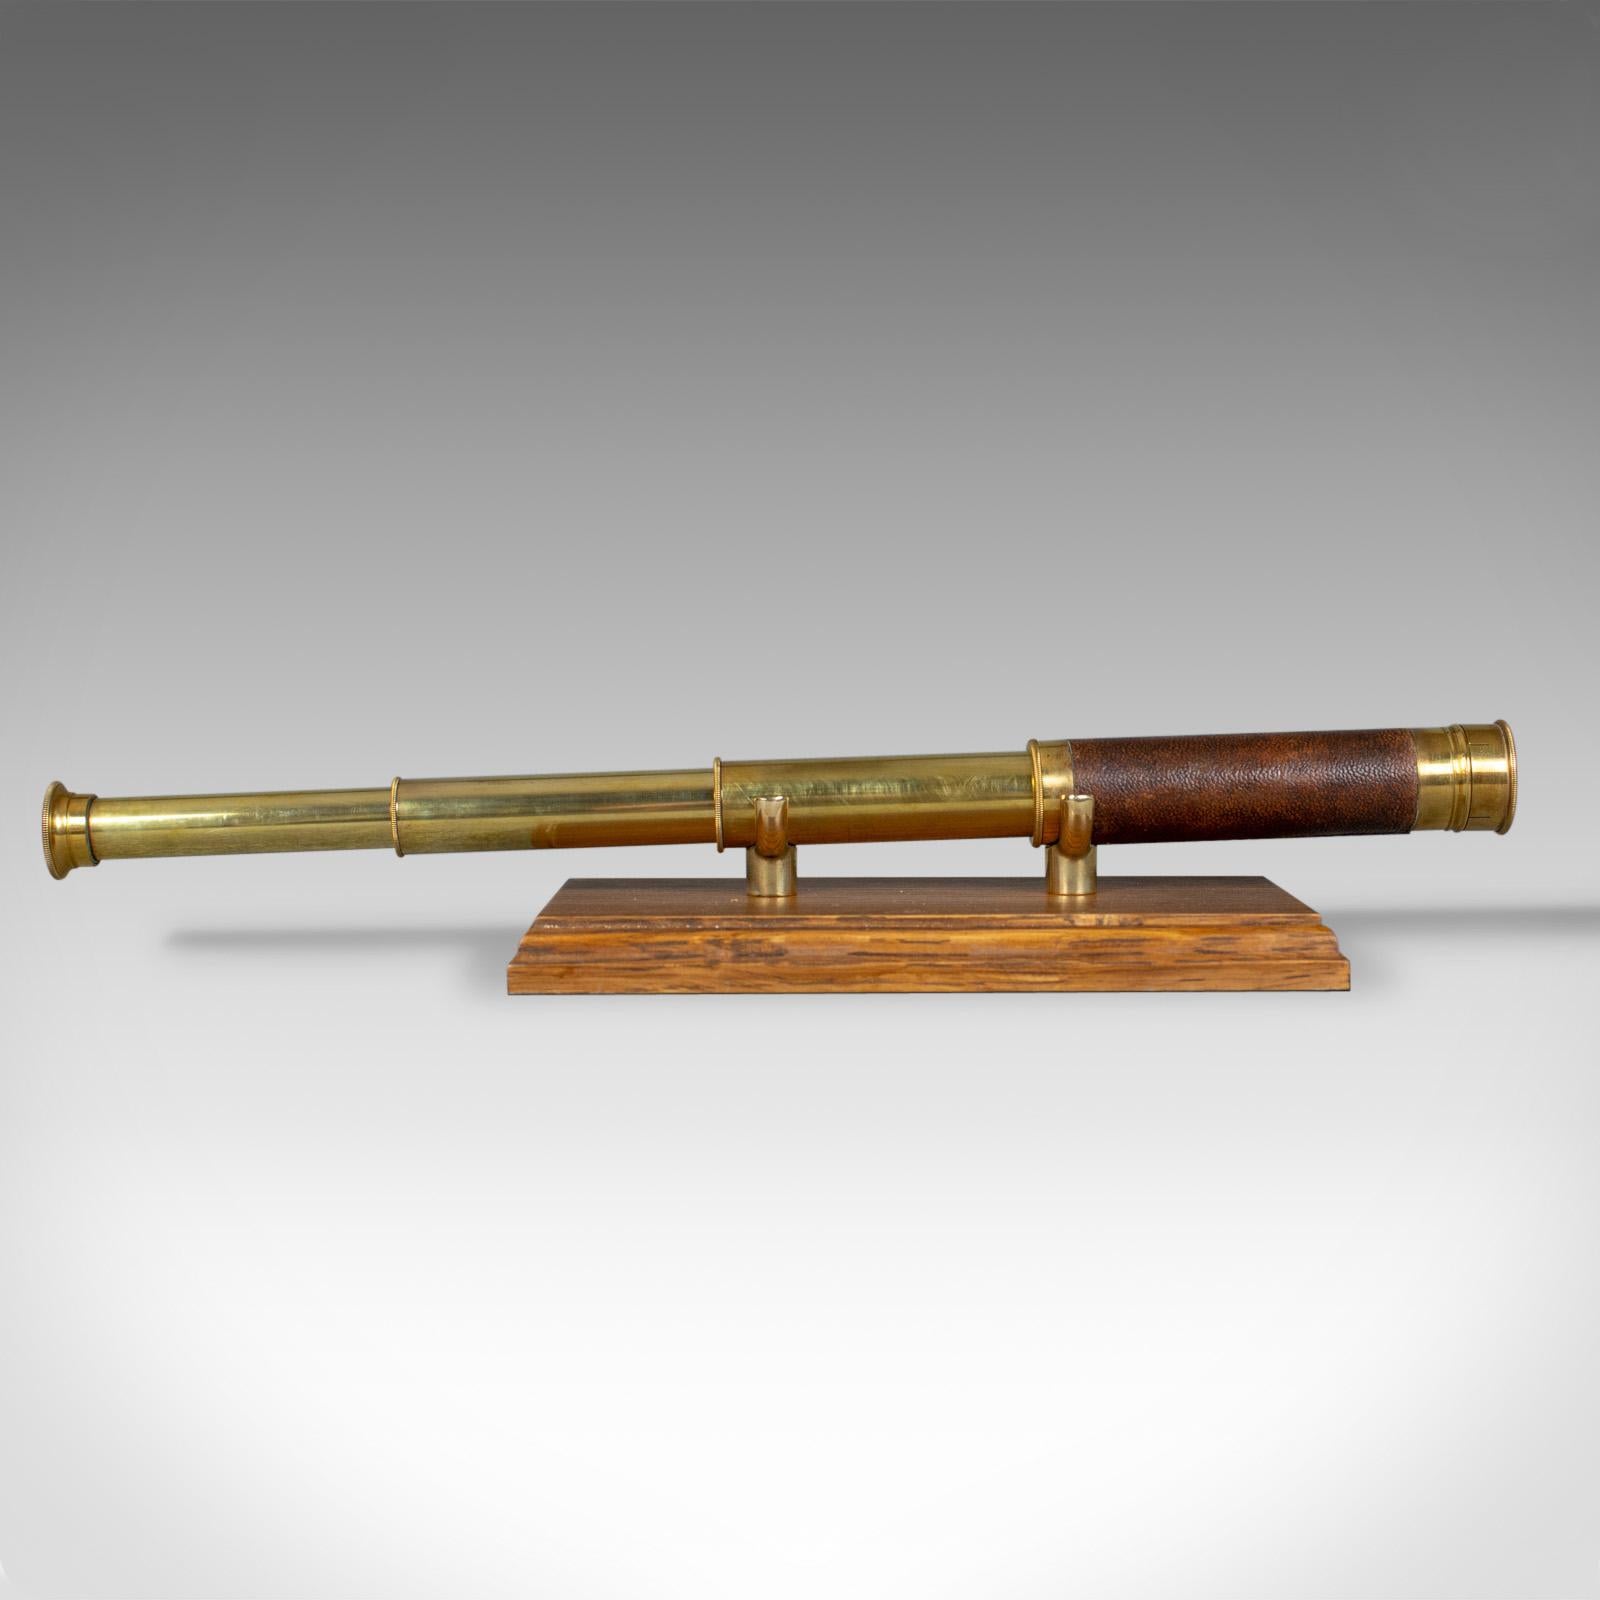 This is an antique pocket telescope, a three draw refractor for terrestrial or astronomical use. An English Victorian Scope dating to the late 19th century circa 1895.

Perfect for bird watching, landscape appreciation, wildlife, or maritime